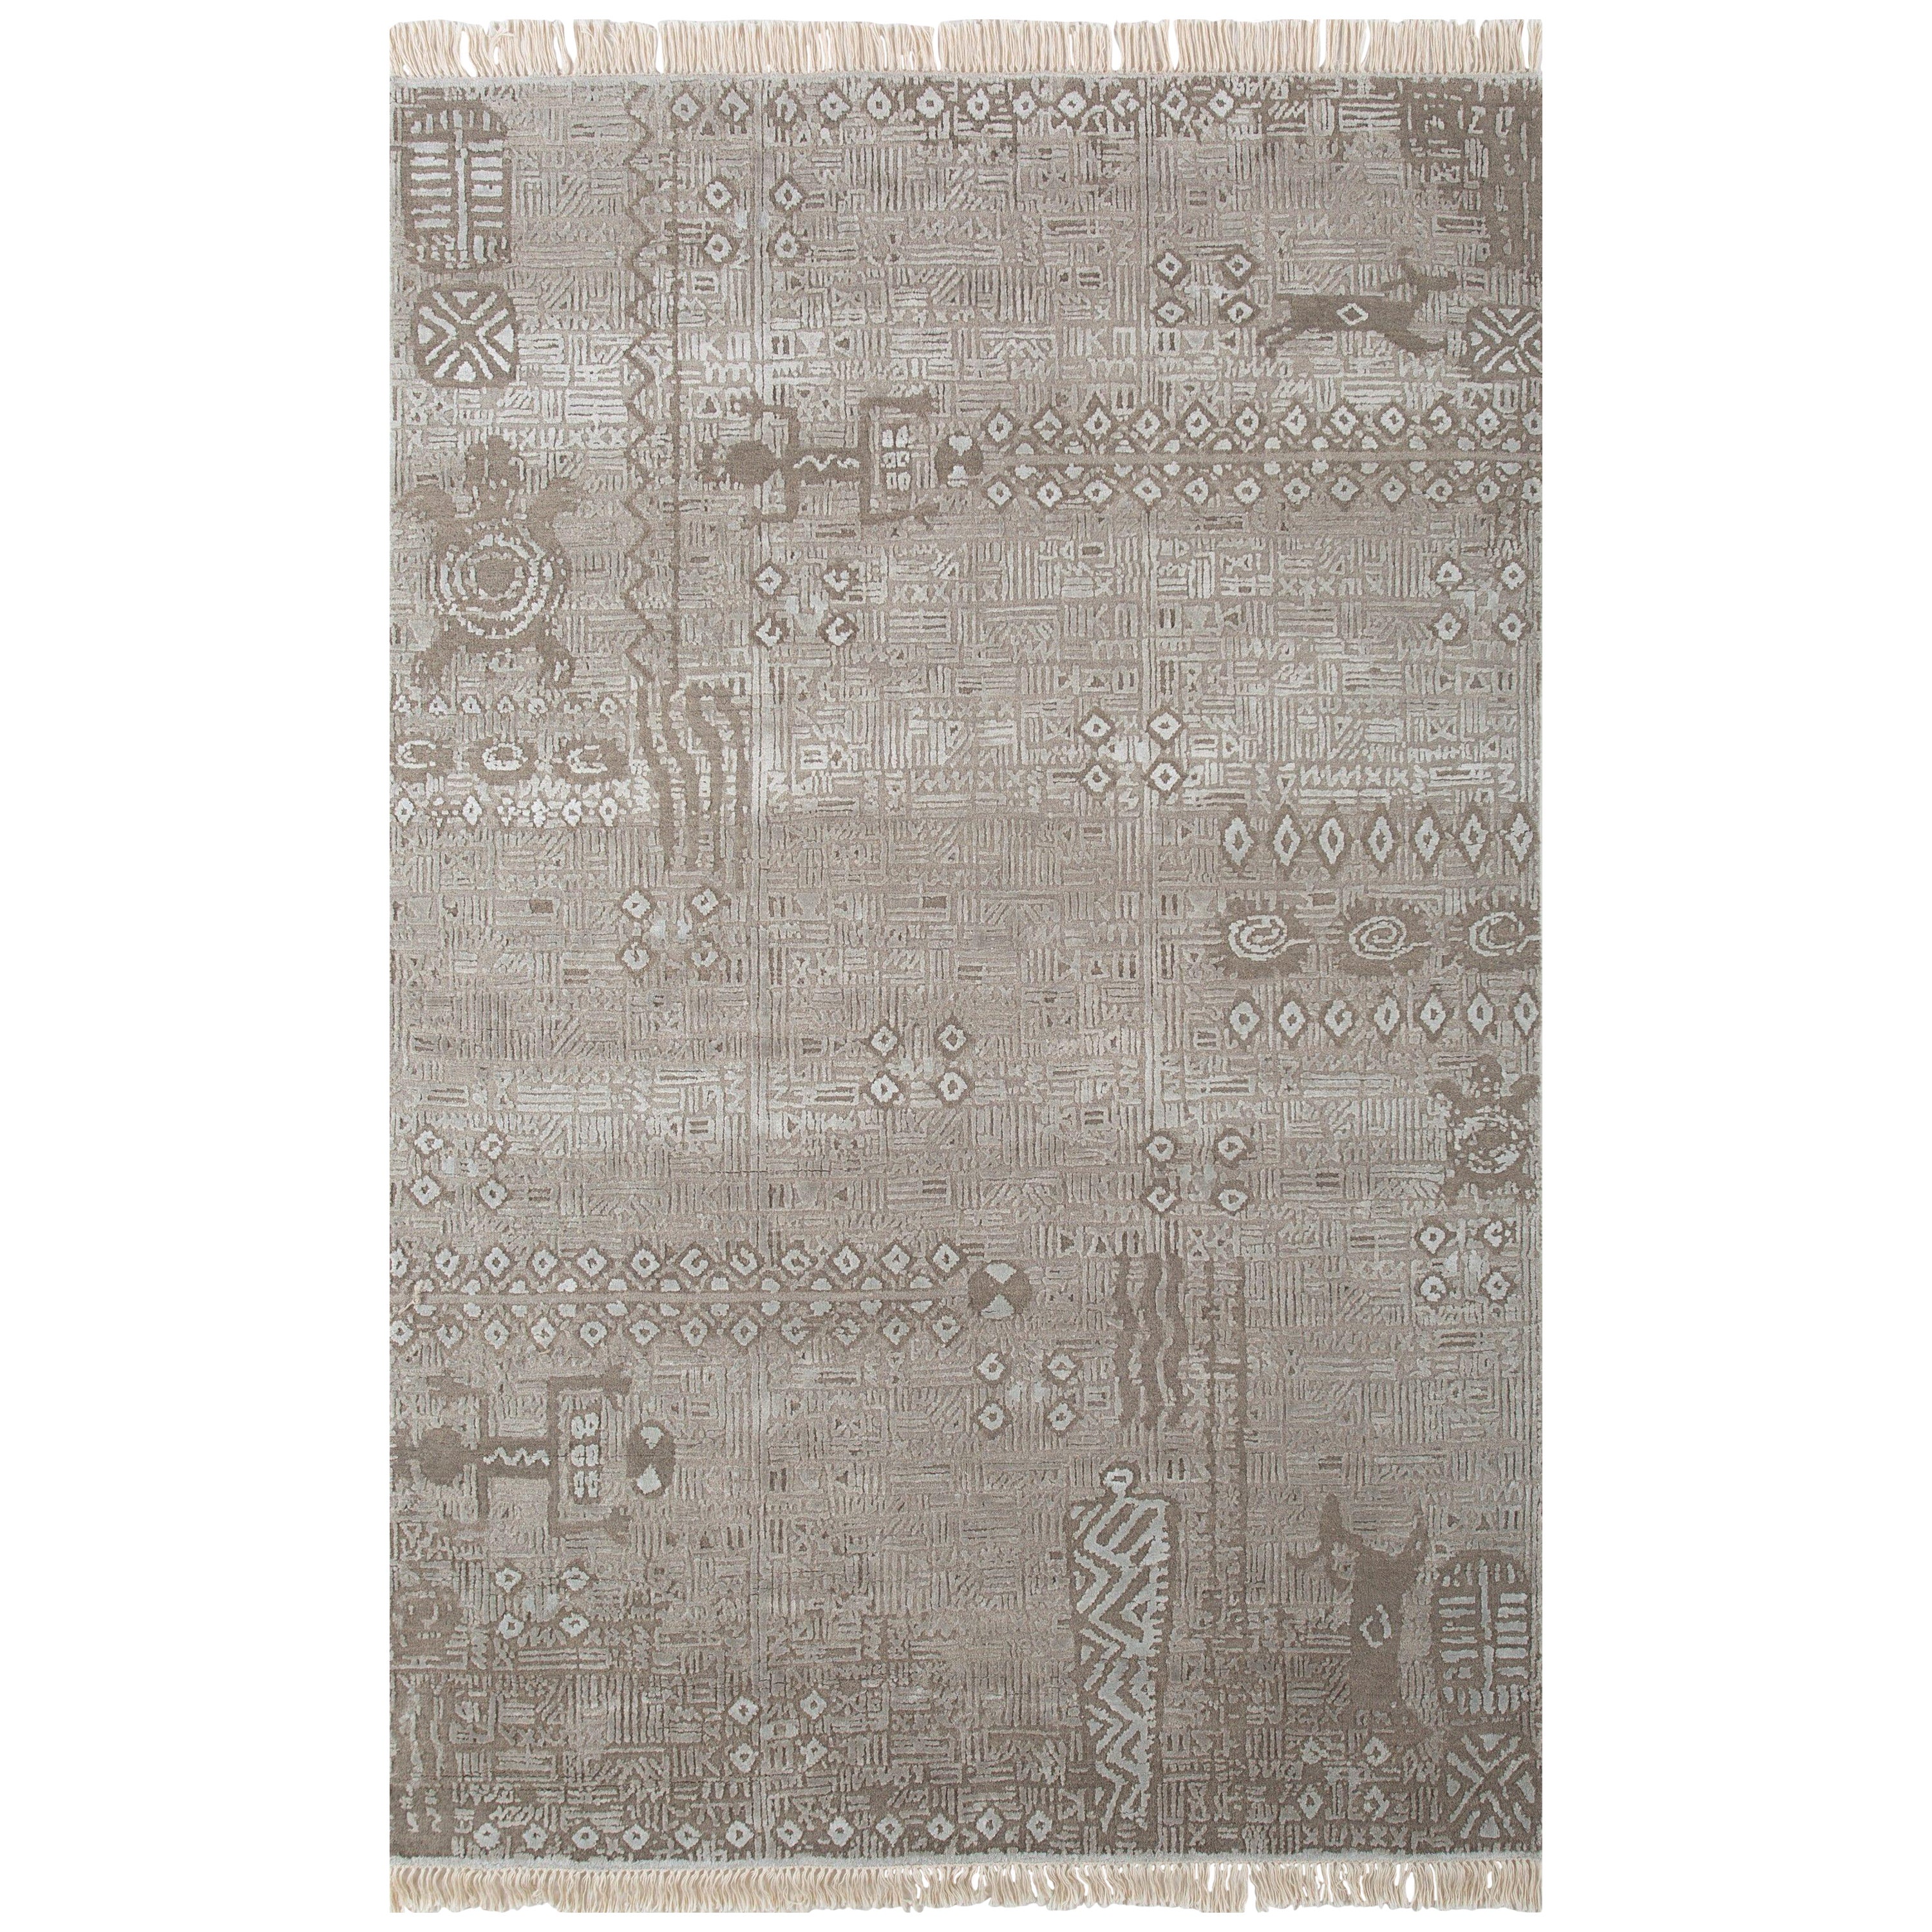 Transcendence Heritage Platinum & Nickel 180X270 Handknotted Rugs For Sale